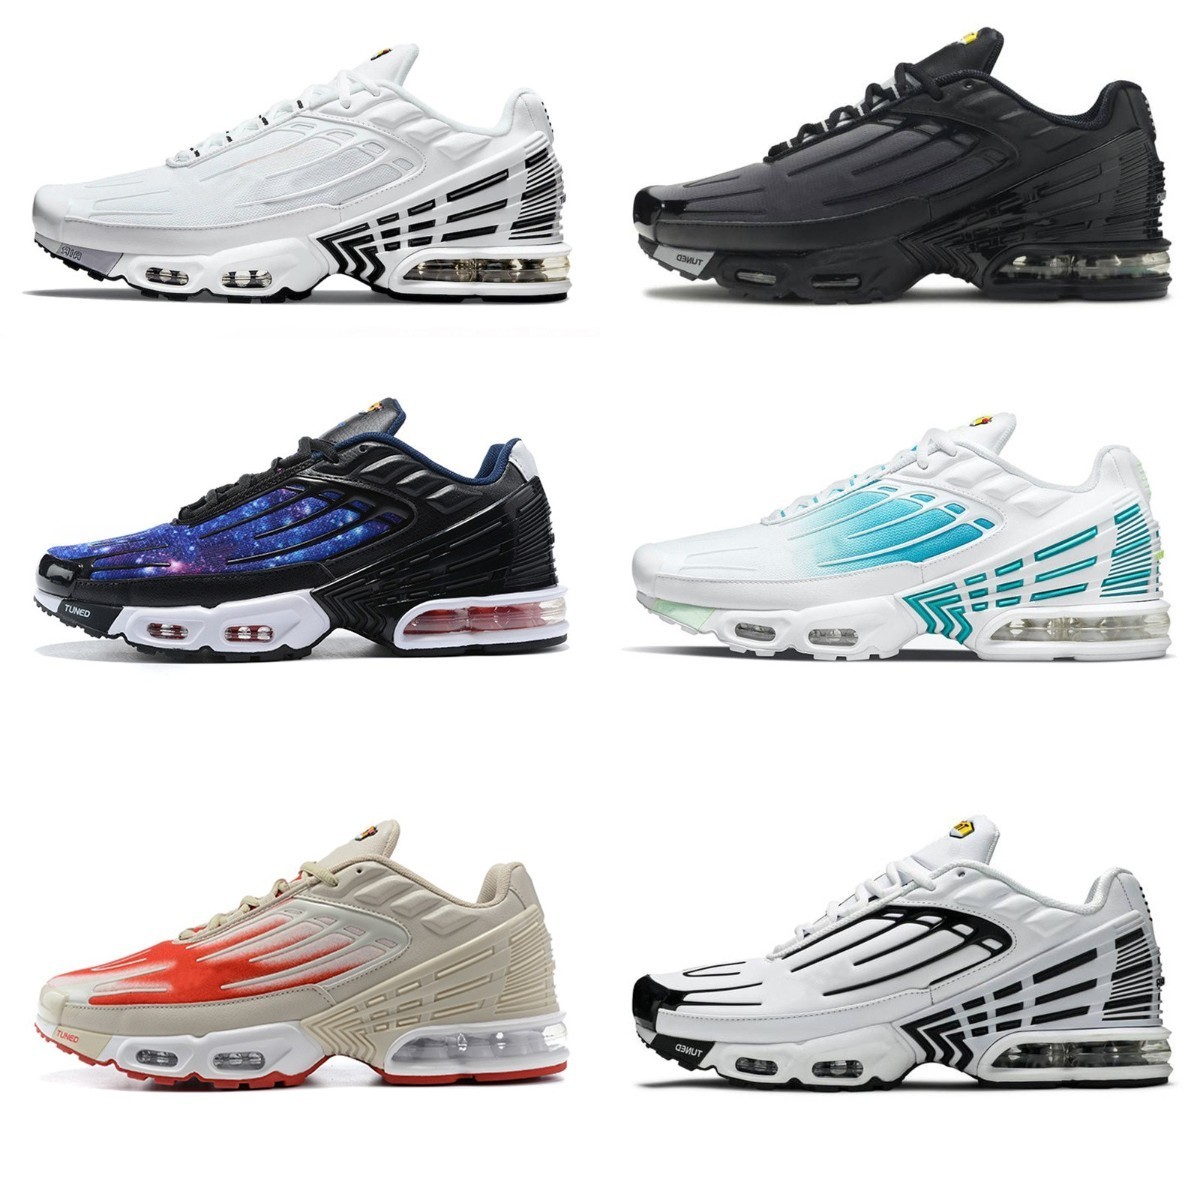 

Trainers Tn Plus 3 Tuned Mens Sports Shoes Laser Blue White Aquamarine Leather Tns Requin Obsidian Hyper Violet Deep Parachute Ghost Green Triple Black Sneakers S8, Please contact us